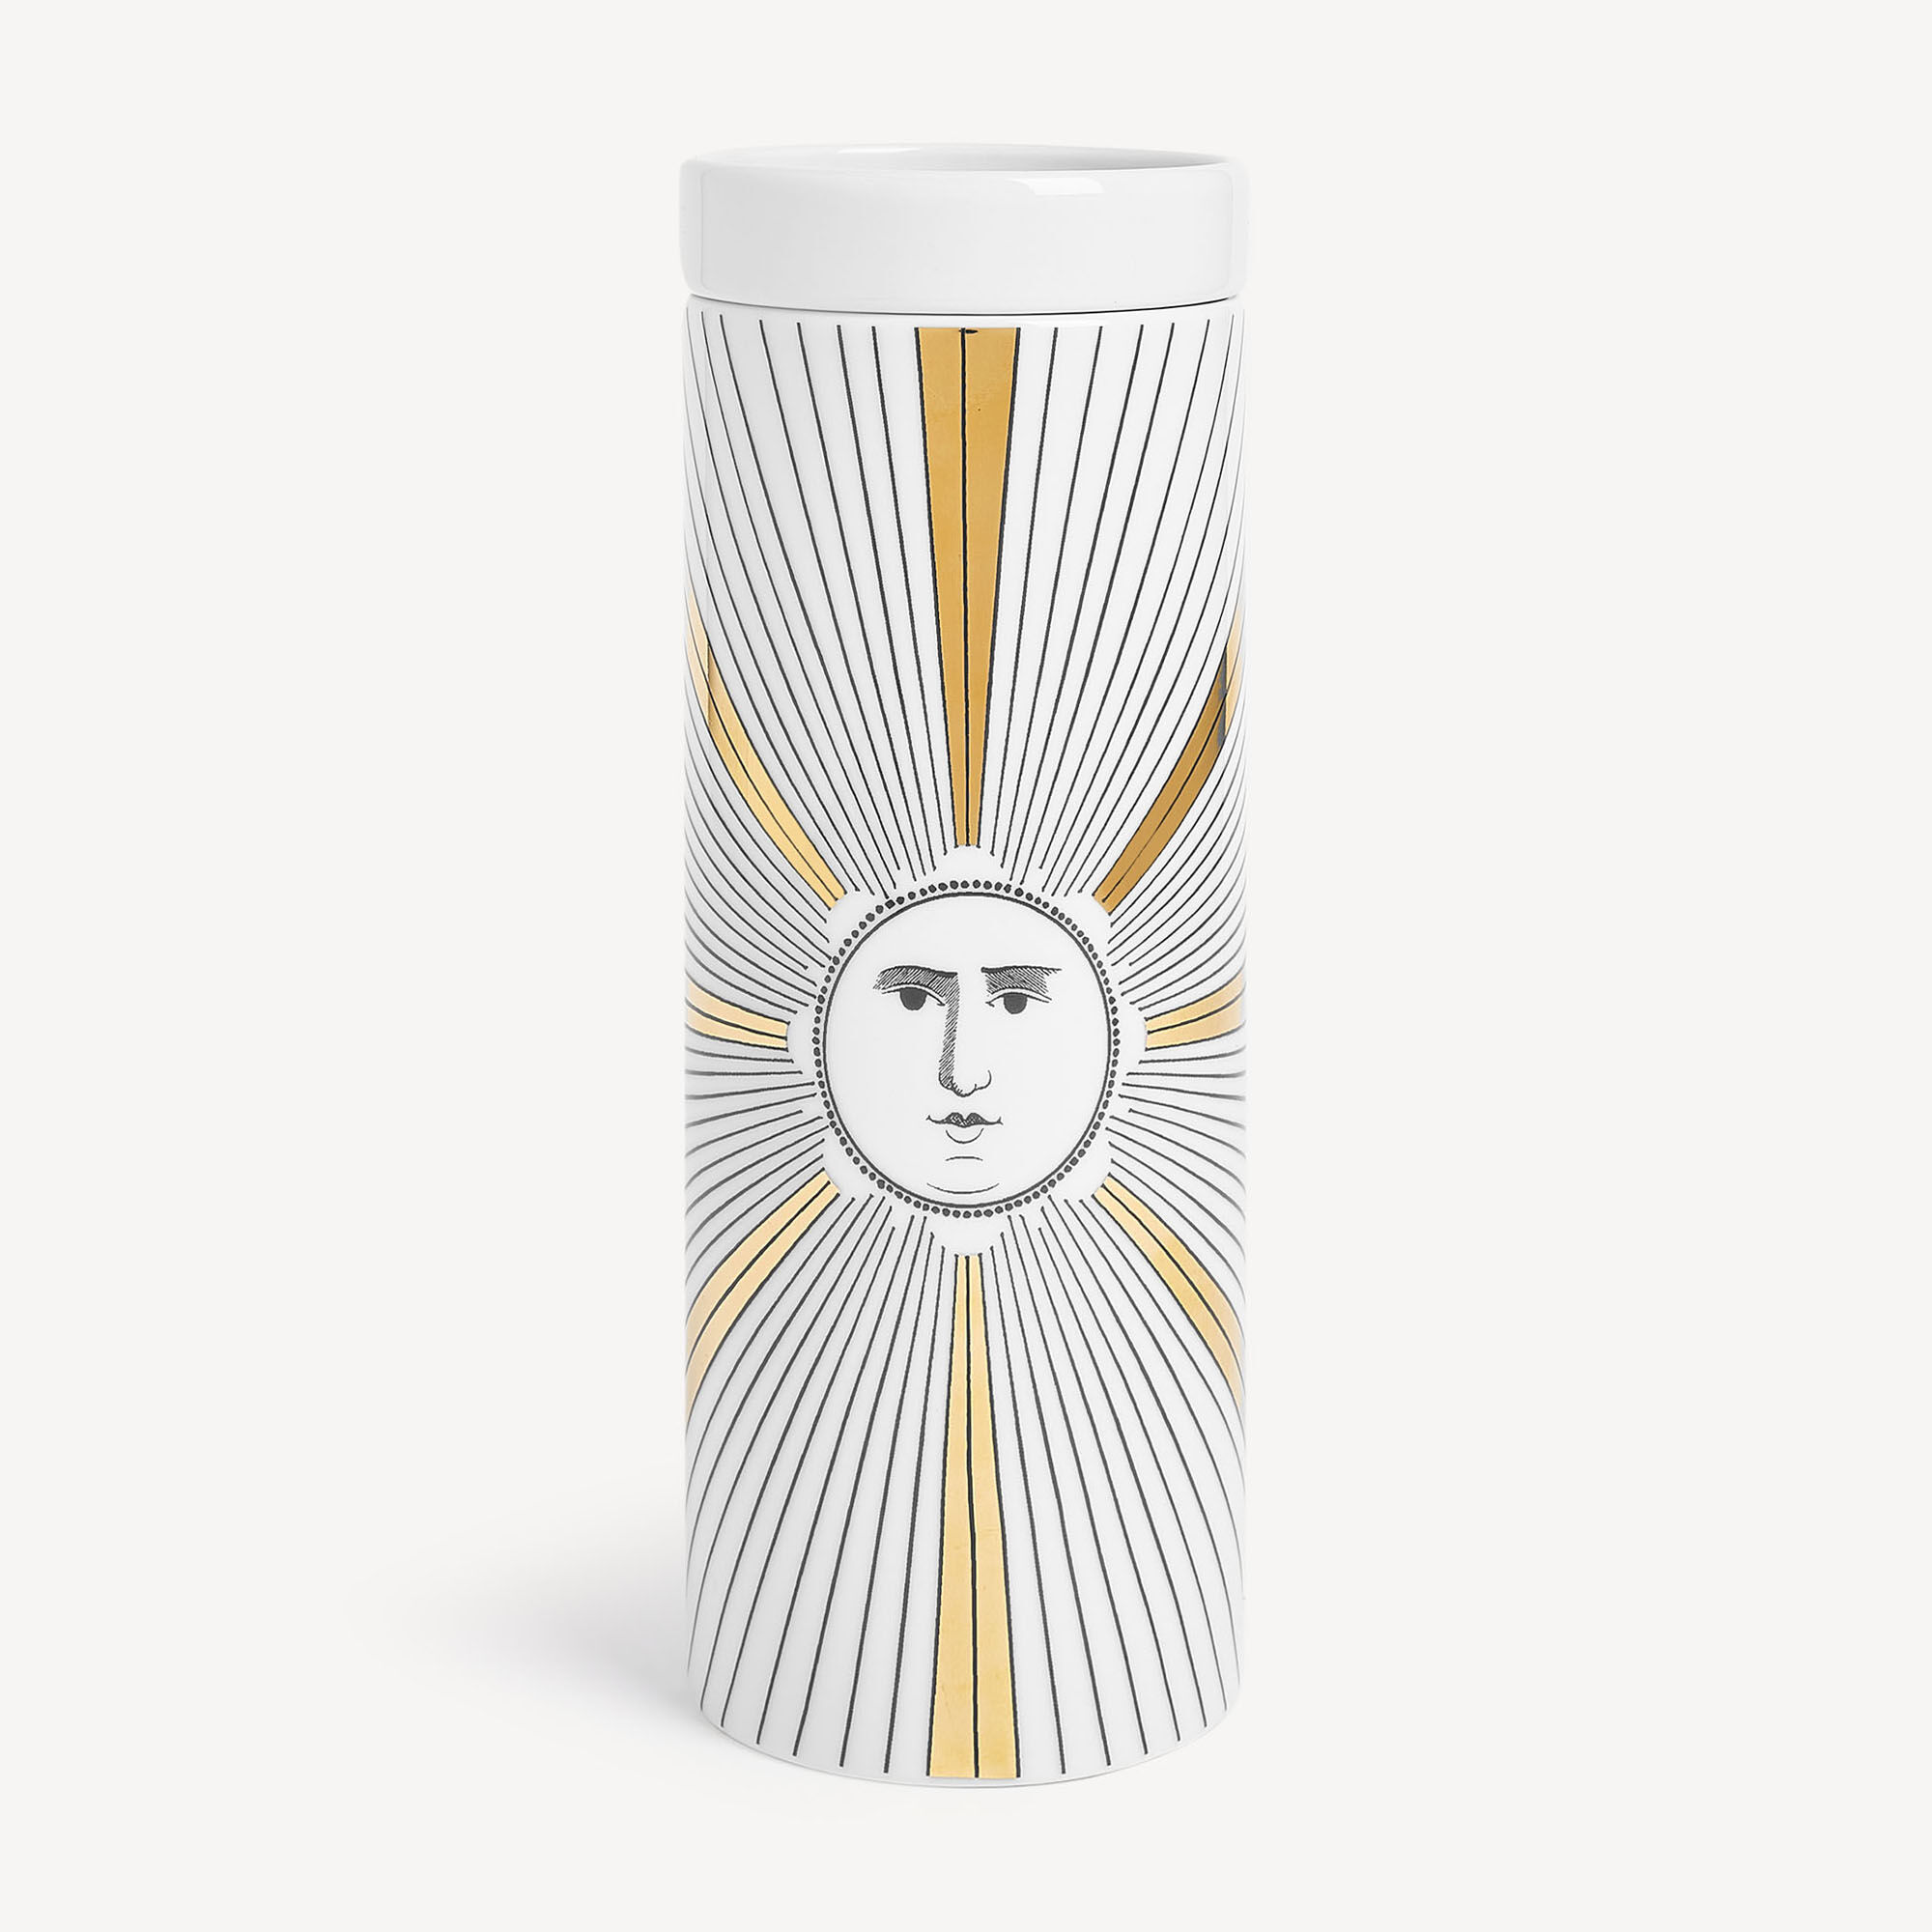 Luxury home perfumes and candles | Fornasetti® - NEL MENTRE Tall scented  Candle - Soli Décor - Immaginazione Fragrance